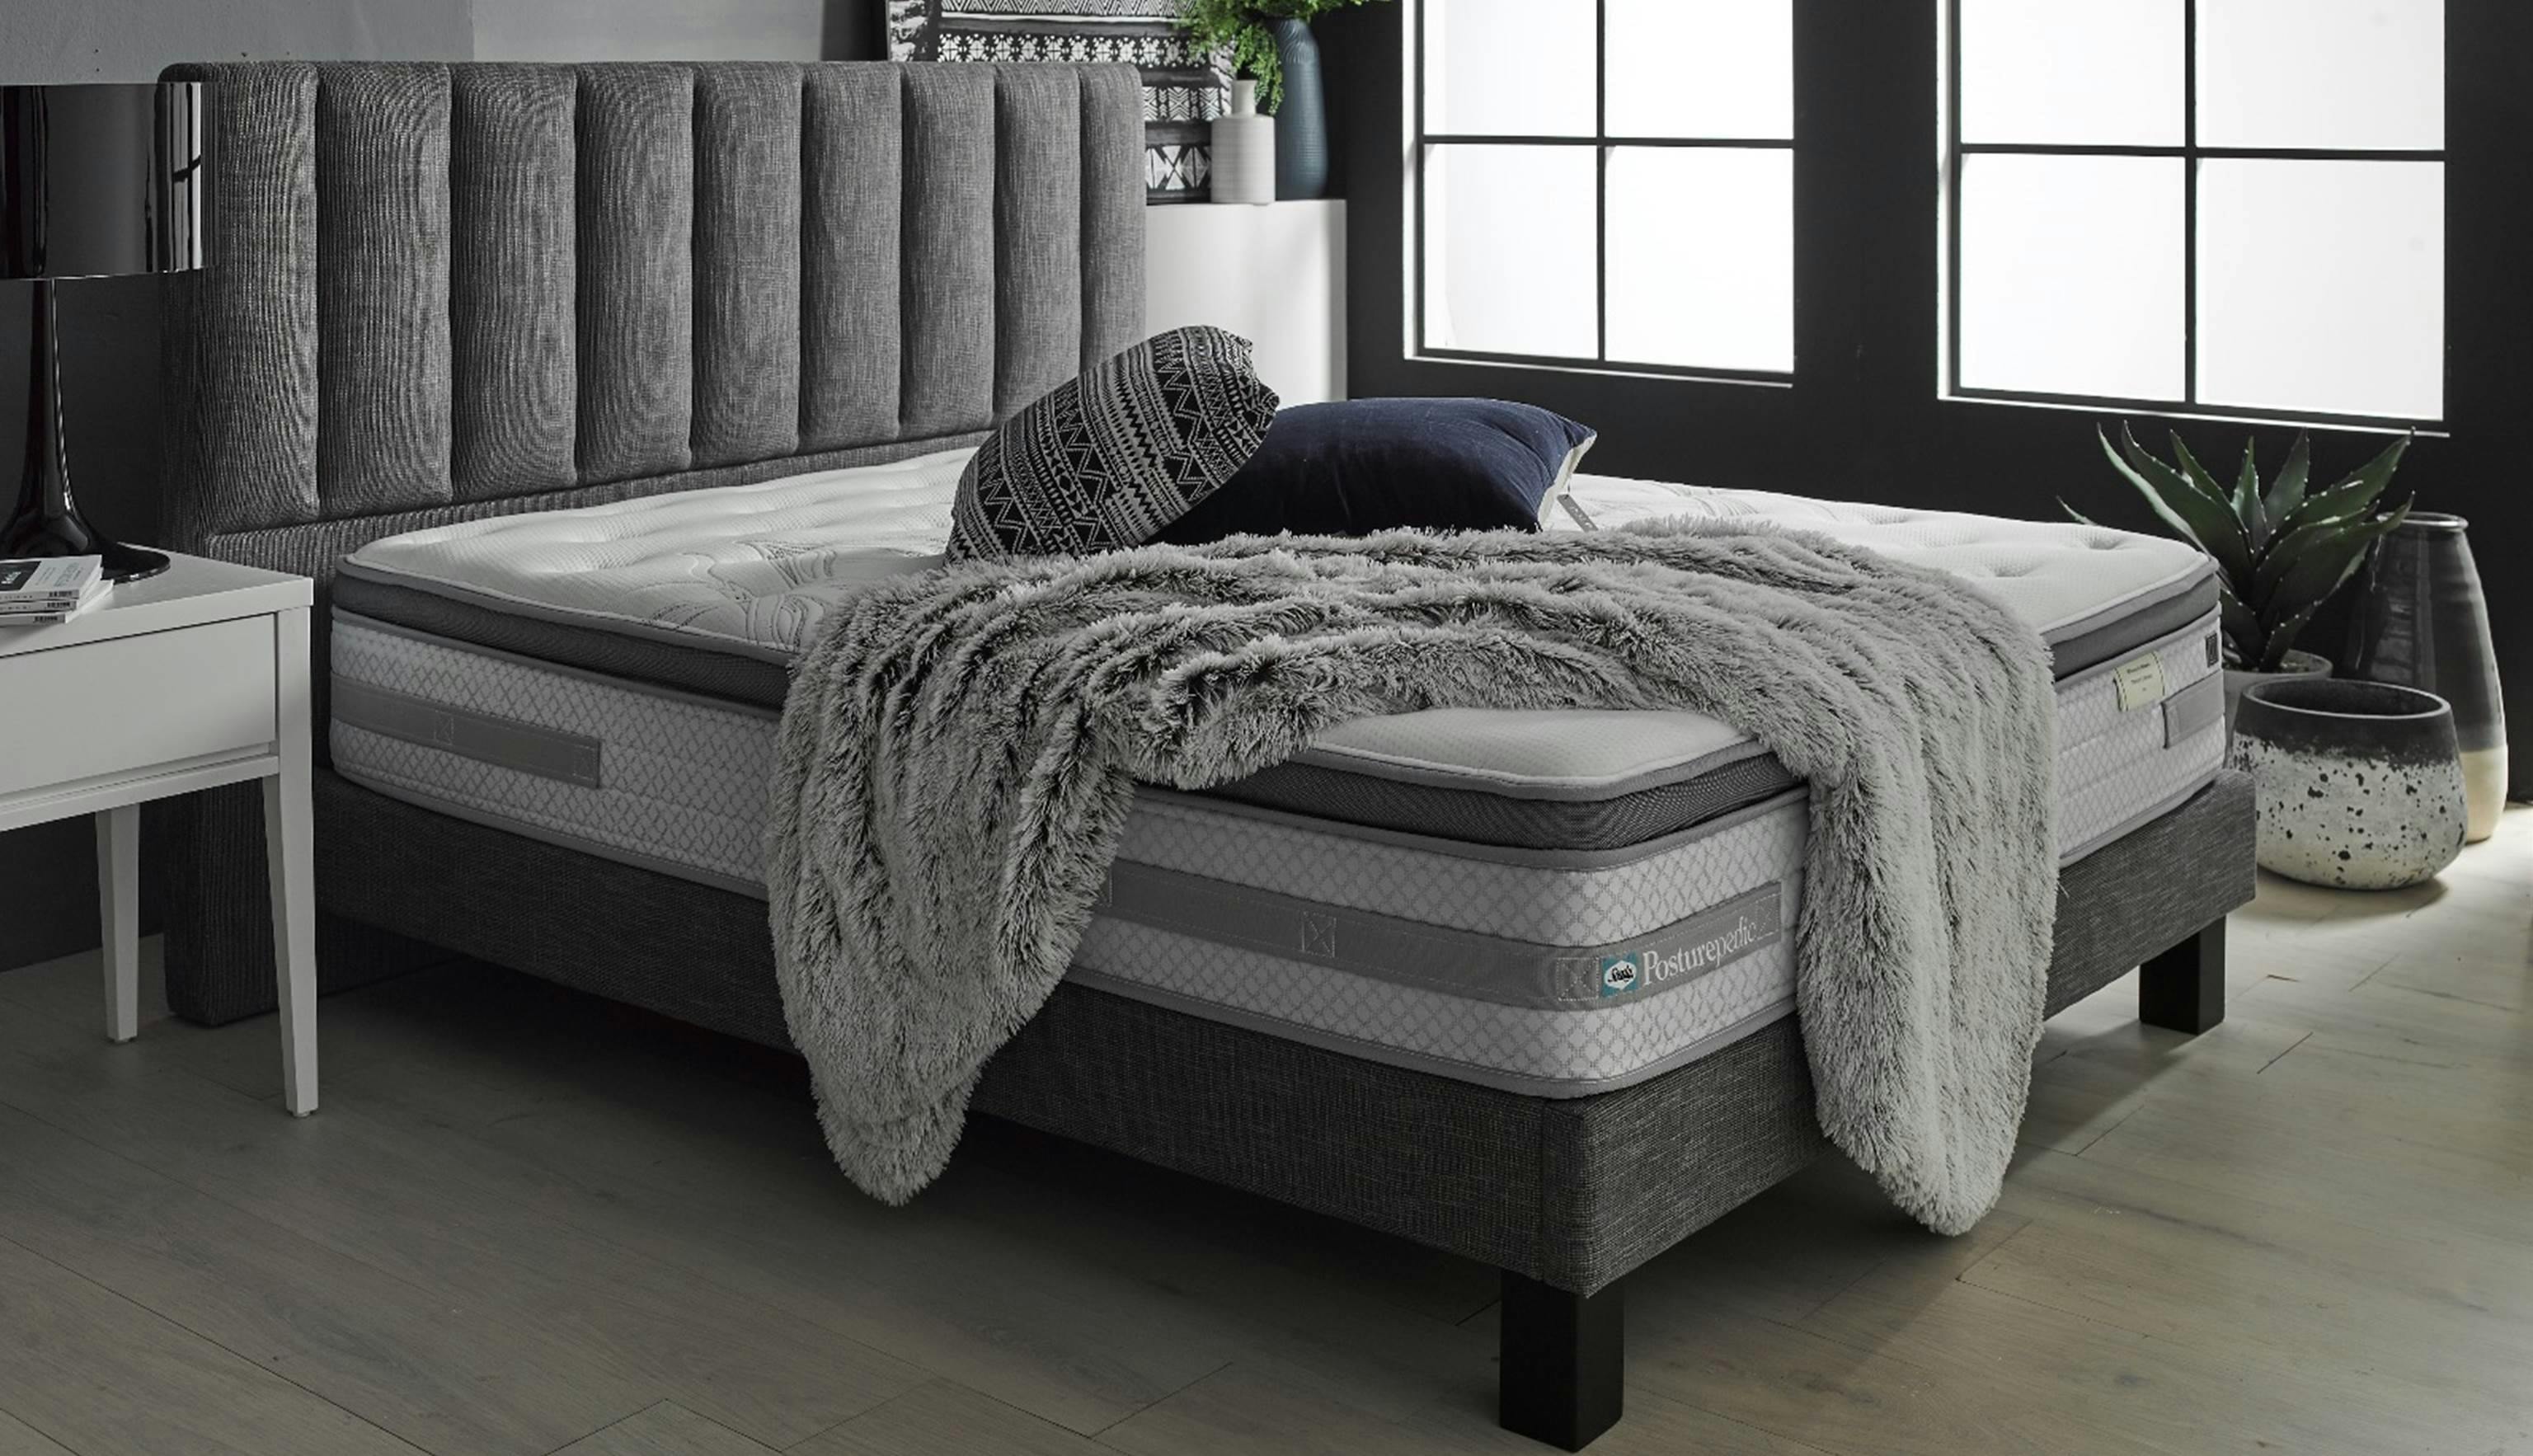 firm queen mattresses for 250 or less